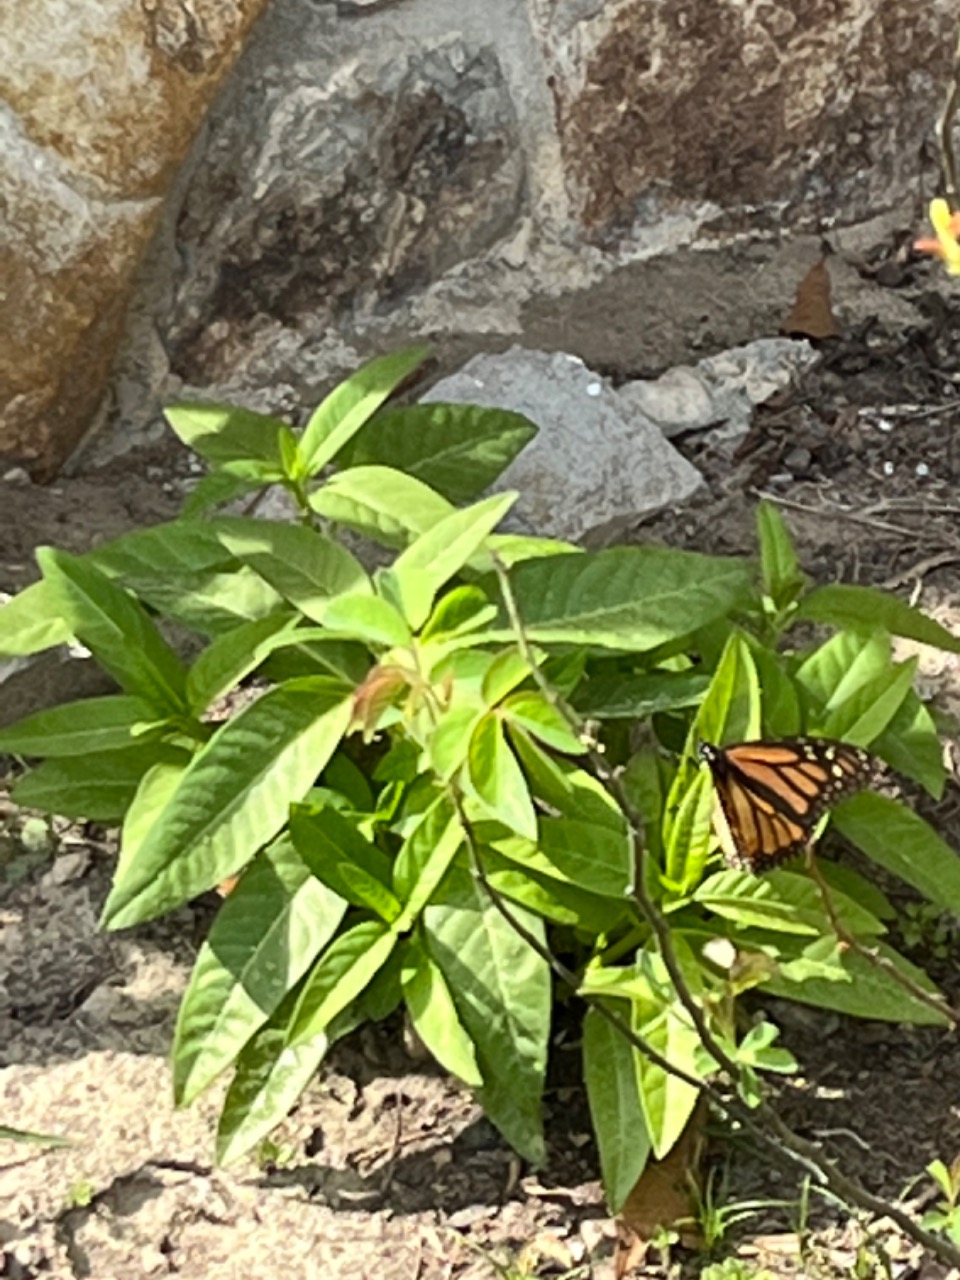 monarch first sighted